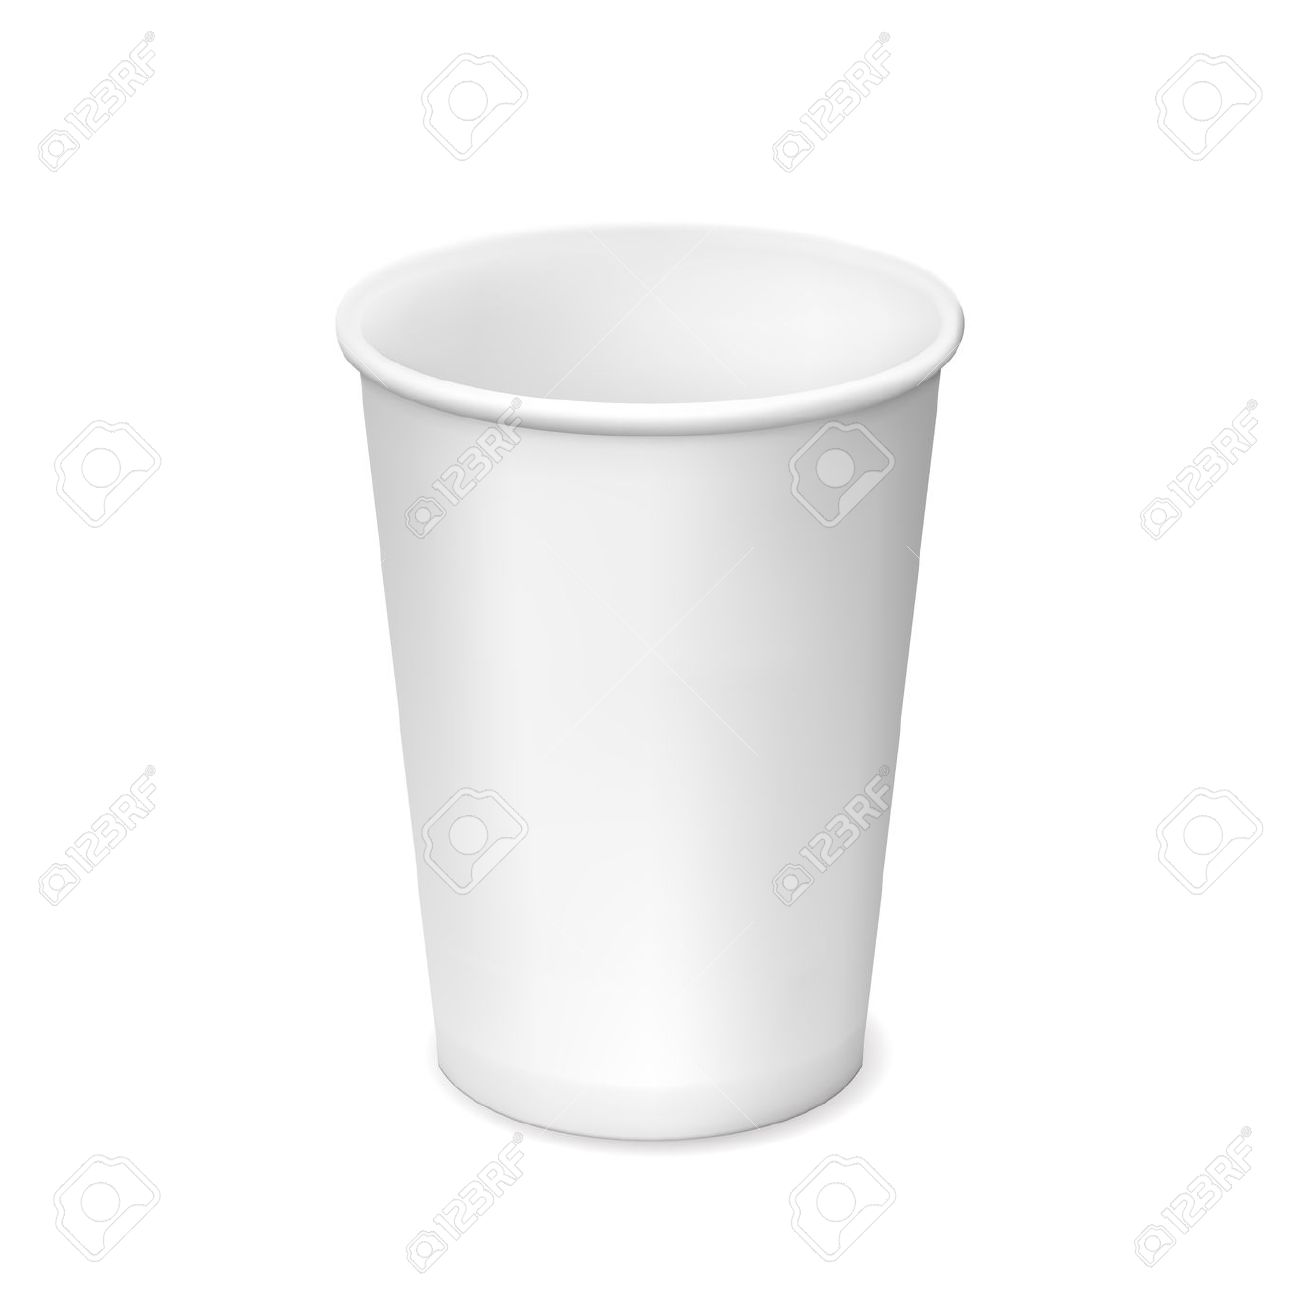 cup plate clipart - photo #43